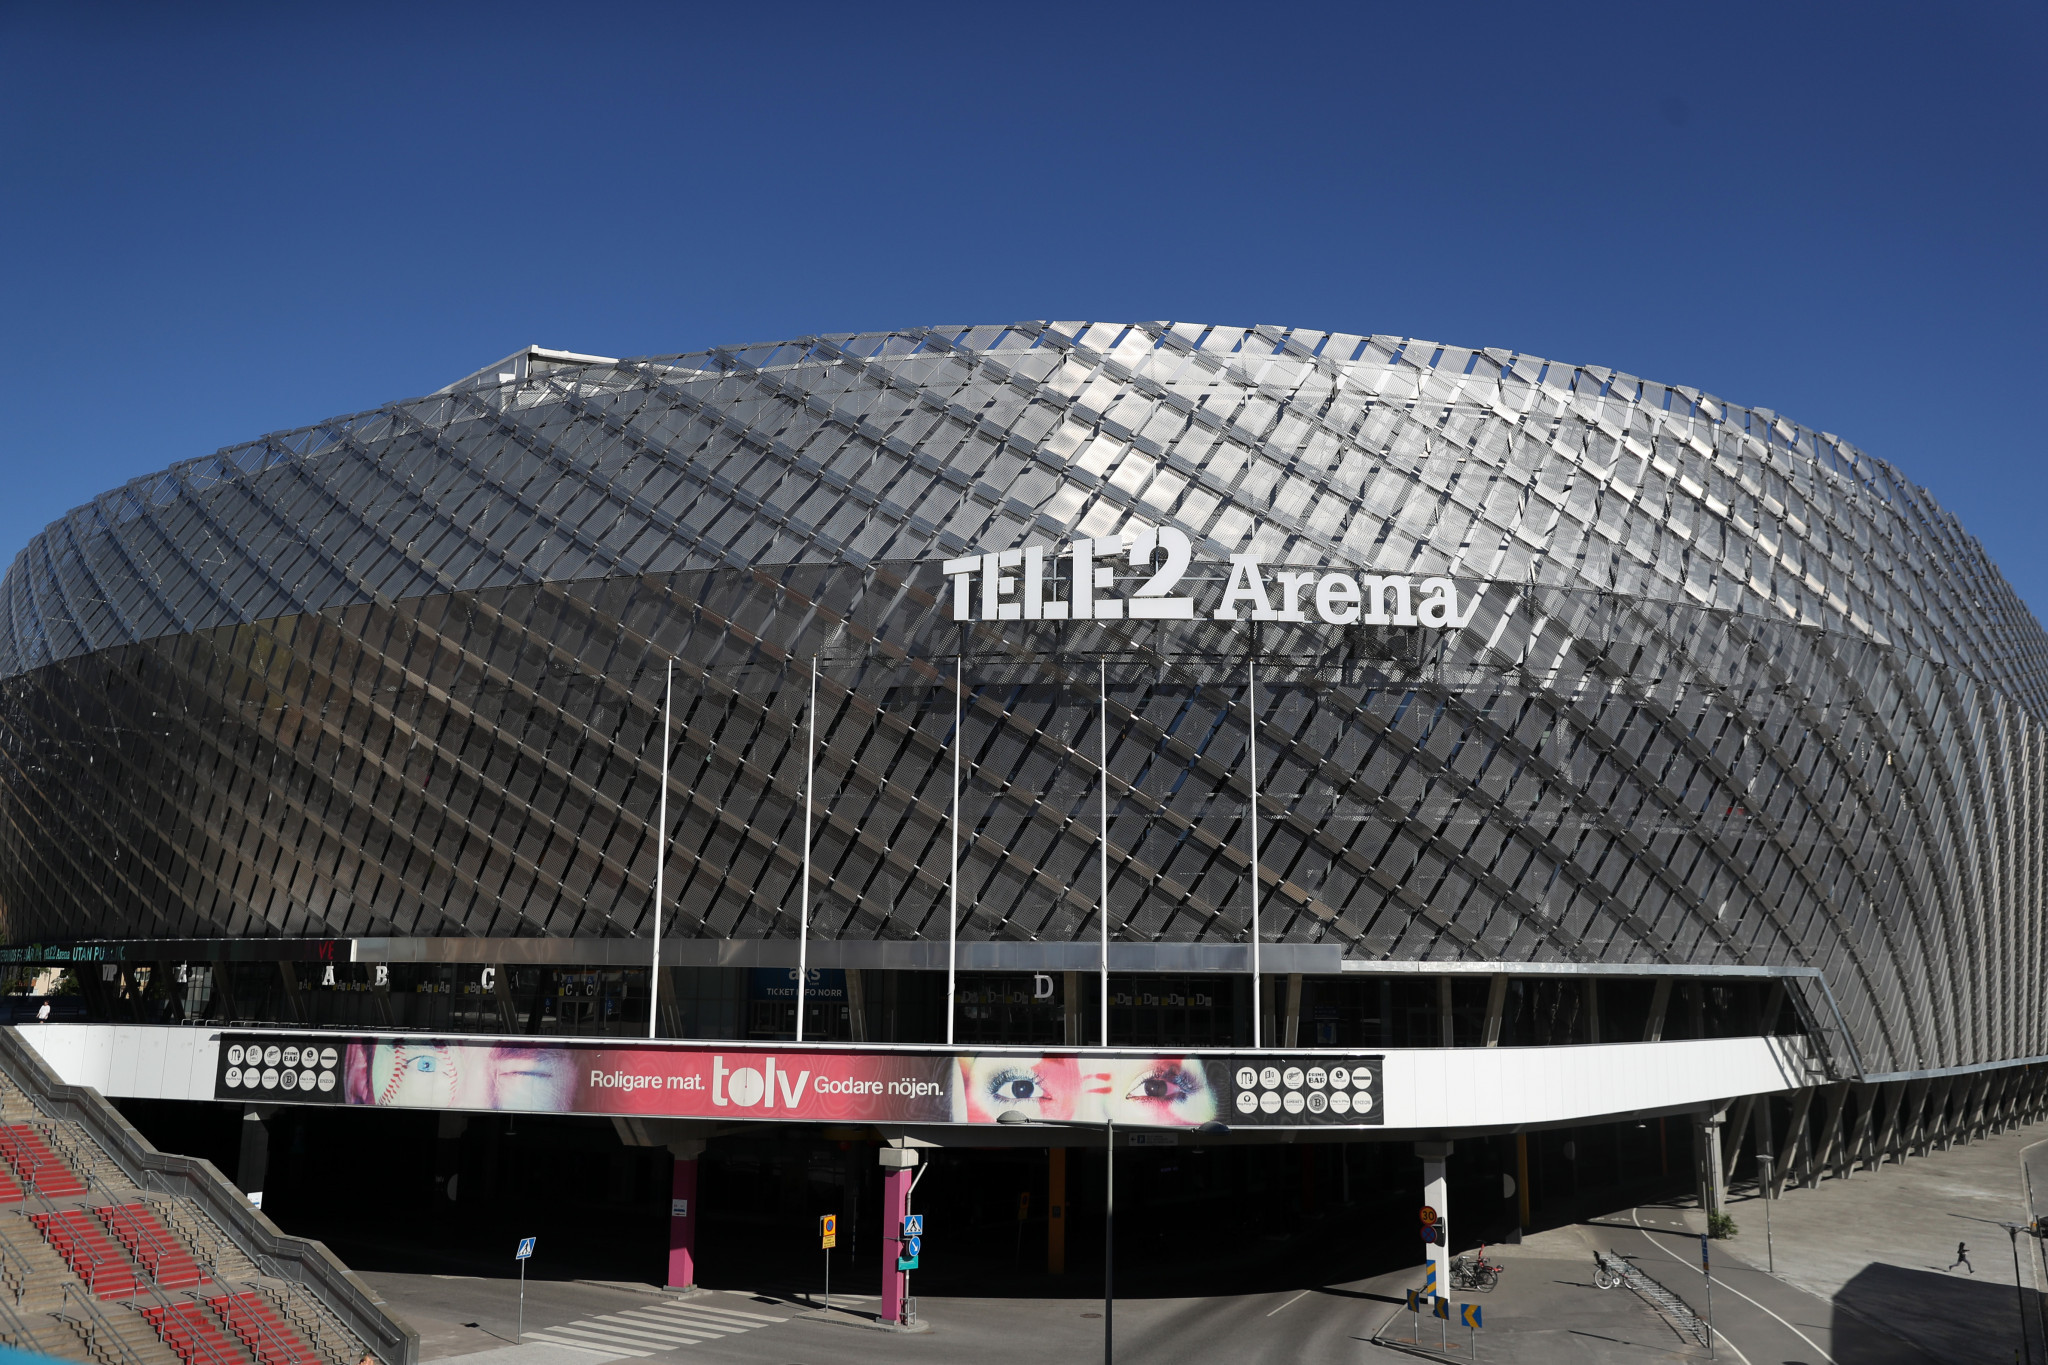 Sweden is set to co-host the IHF Men's World Championship with Poland ©Getty Images